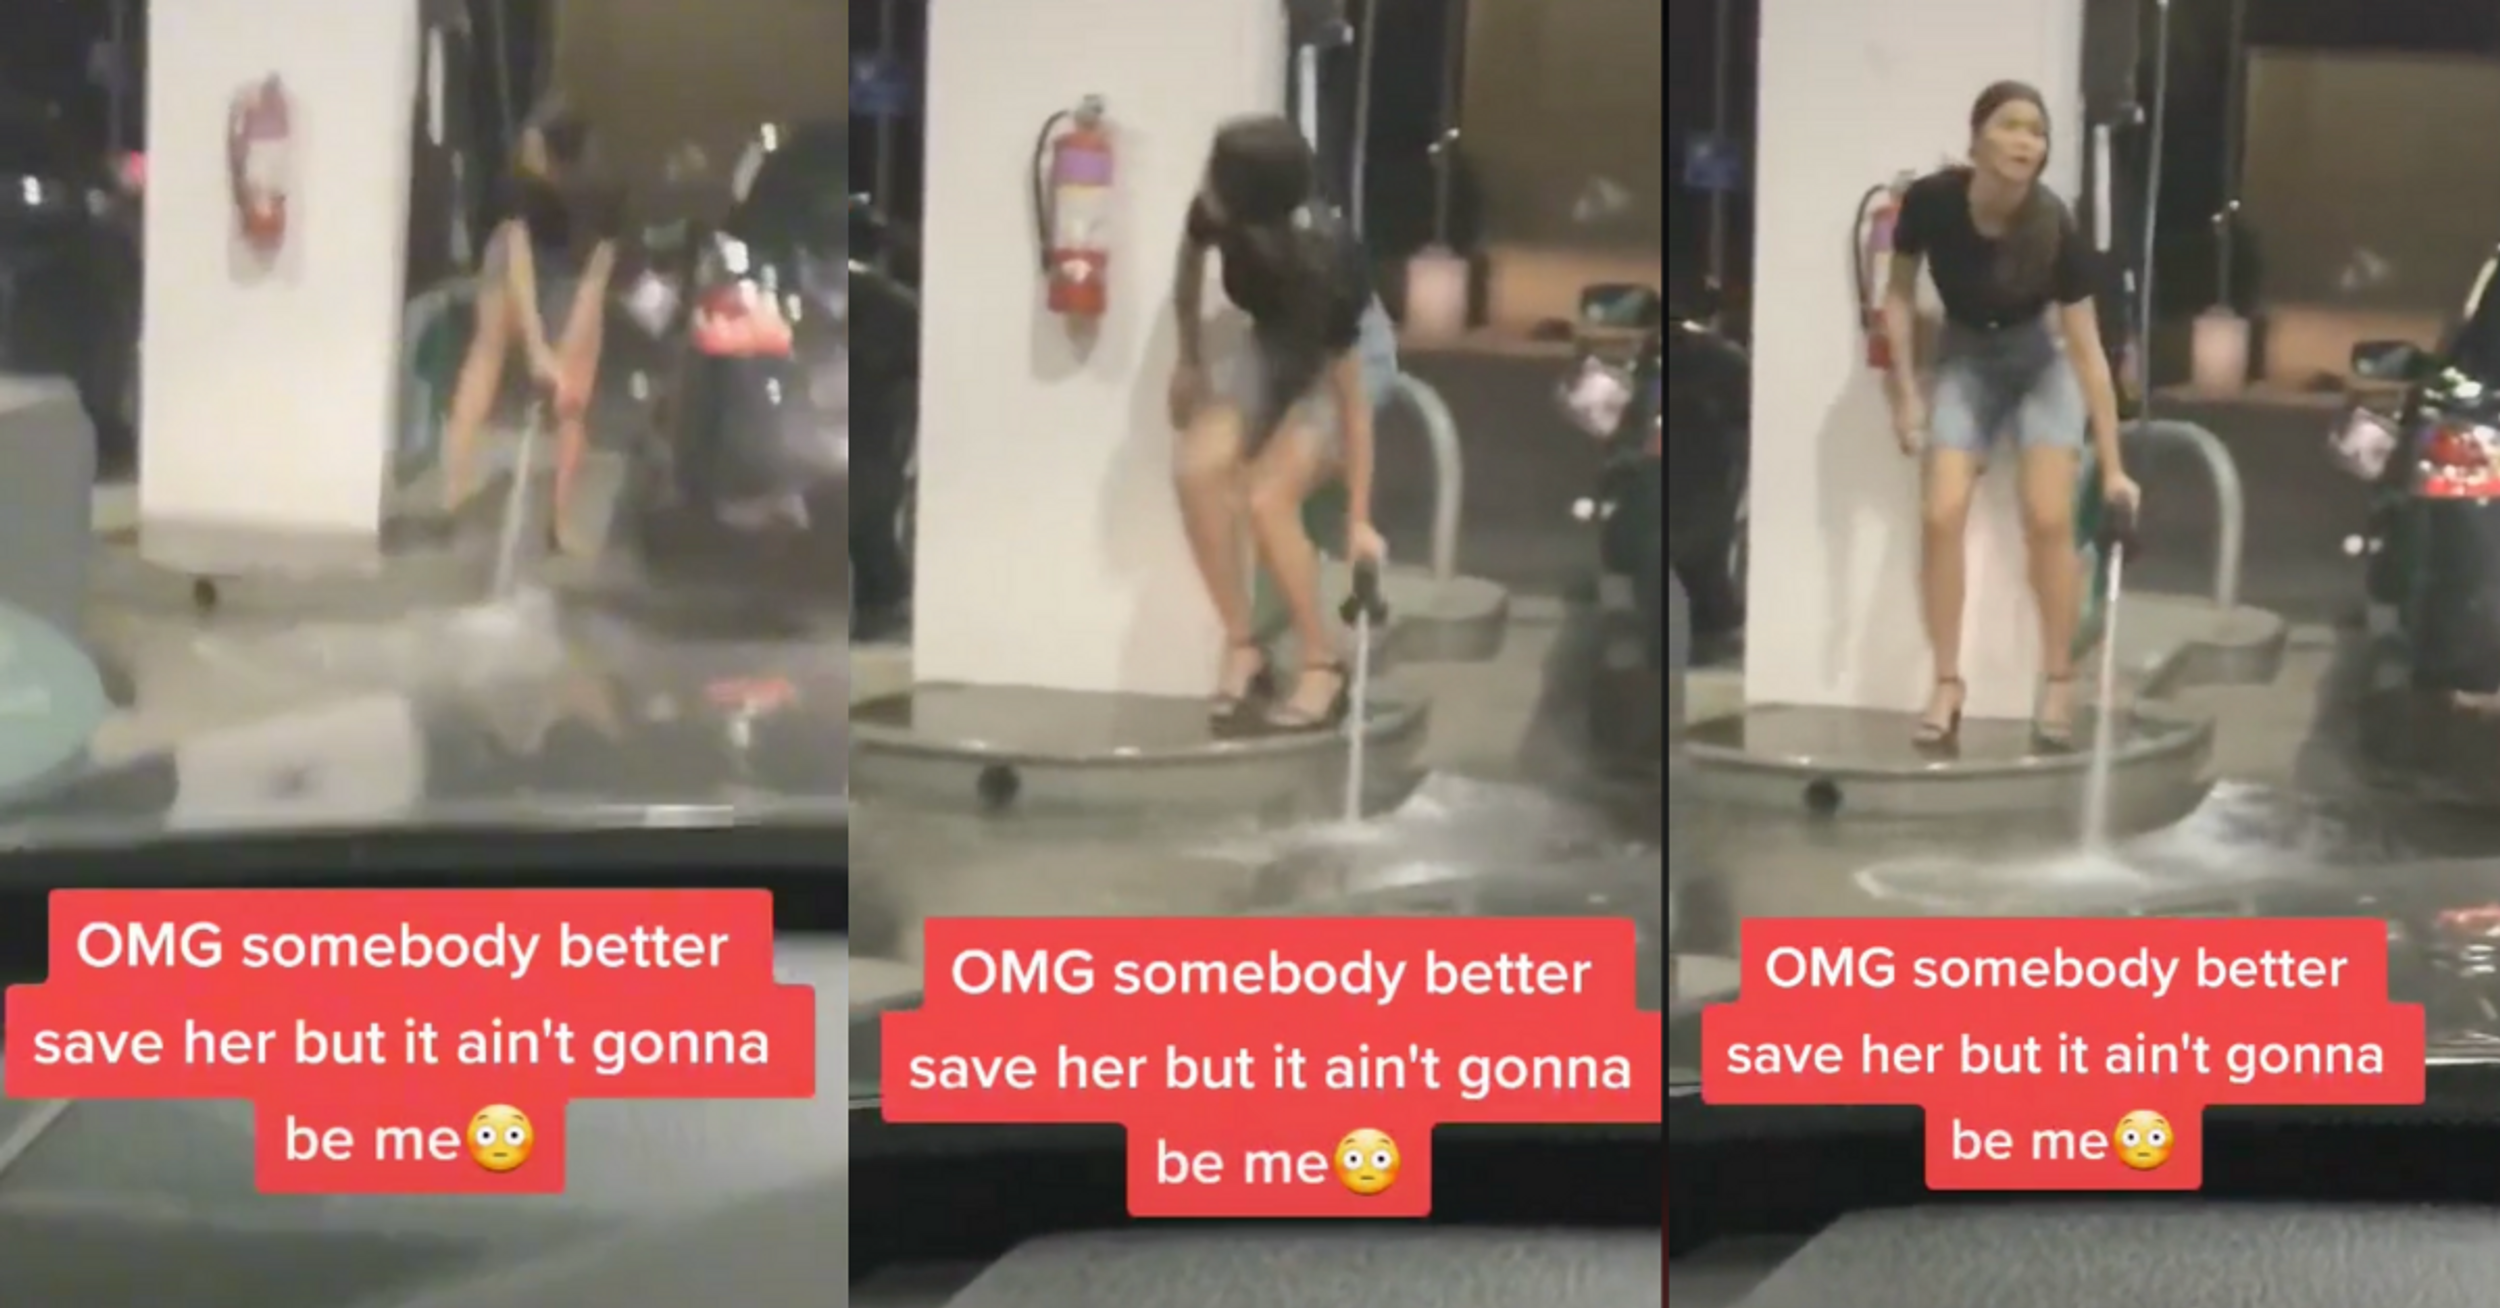 TikTok Mortified For Woman After Video Of Her Struggle With Gas Nozzle That Won't Turn Off Goes Viral